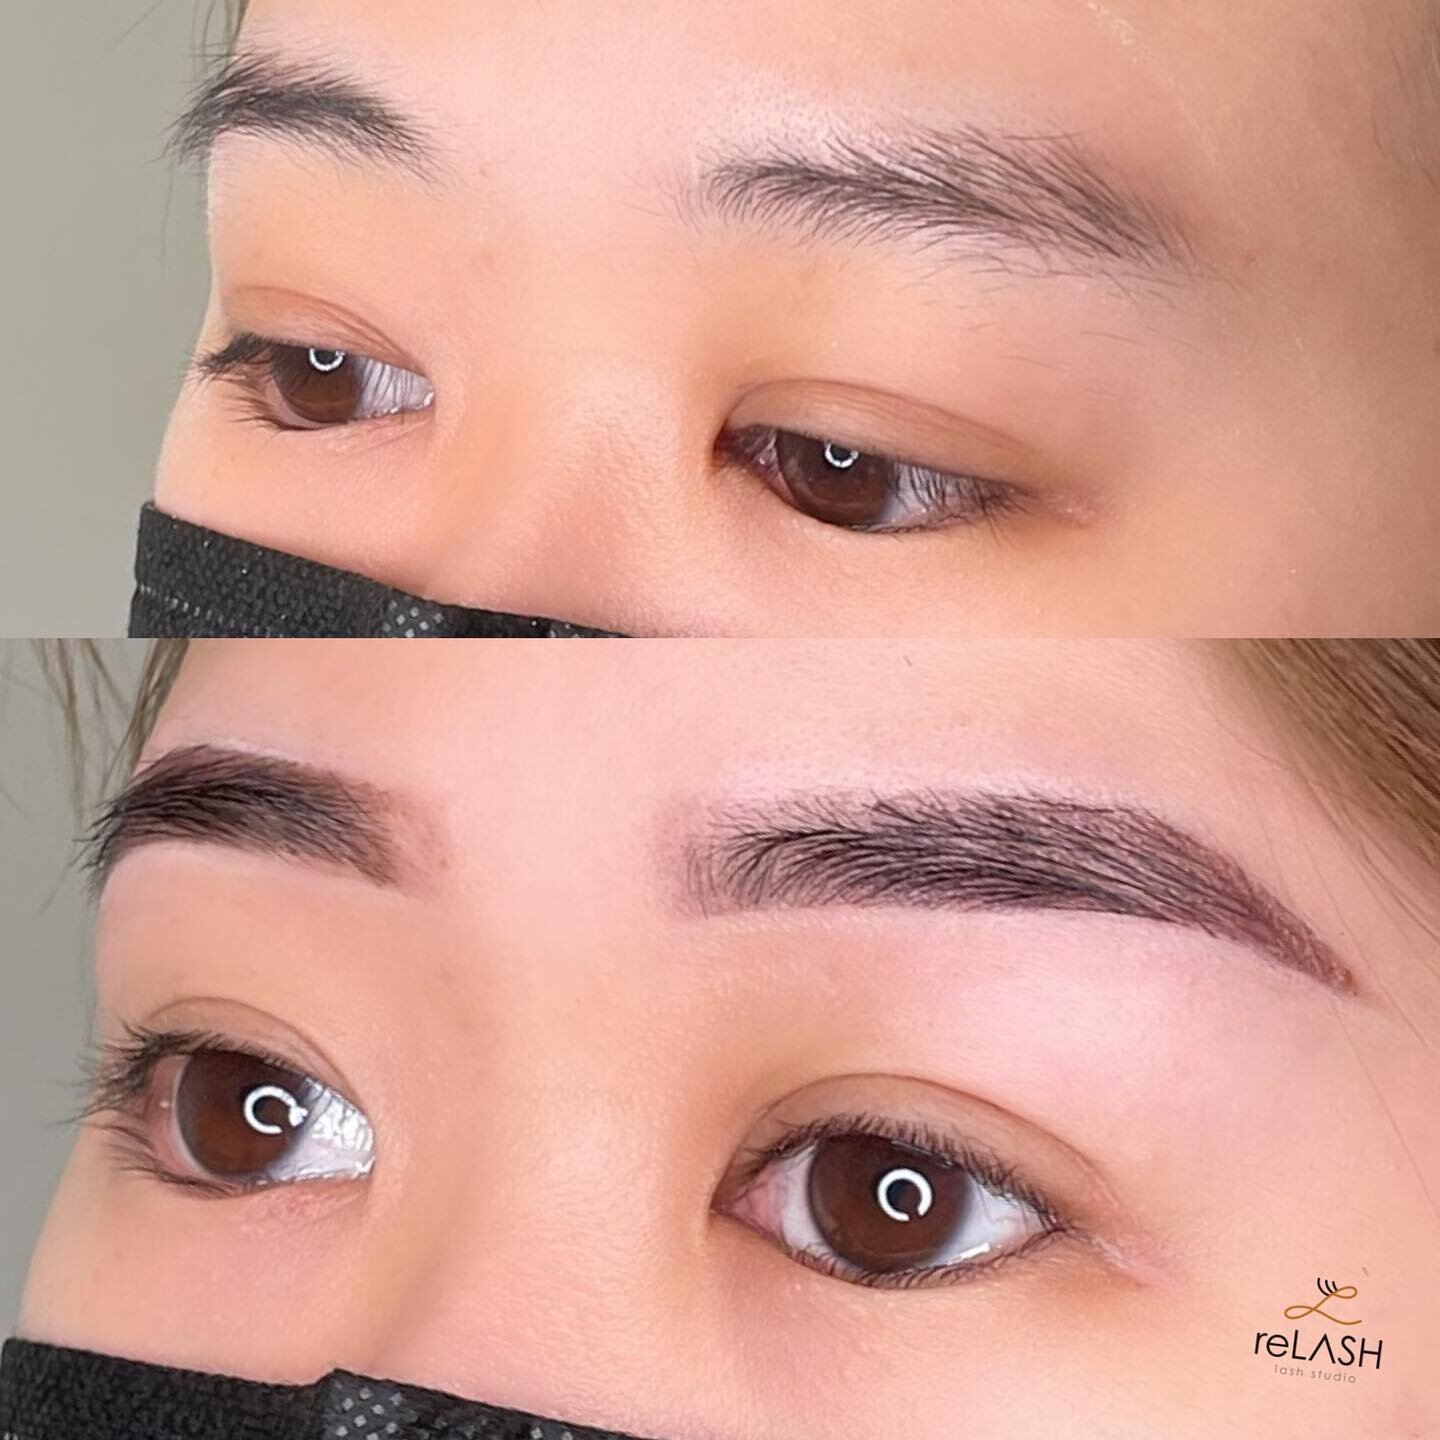 HENNA EYEBROWS + BROW SHAPING 🌱

Henna brows are a natural alternative to traditional eyebrow coloring.

HOW LONG DO HENNA BROWS LAST?
Traditionally the stain on the skin from henna brows can last 1-2 weeks and the color on eyebrows lasts 6-8 weeks,